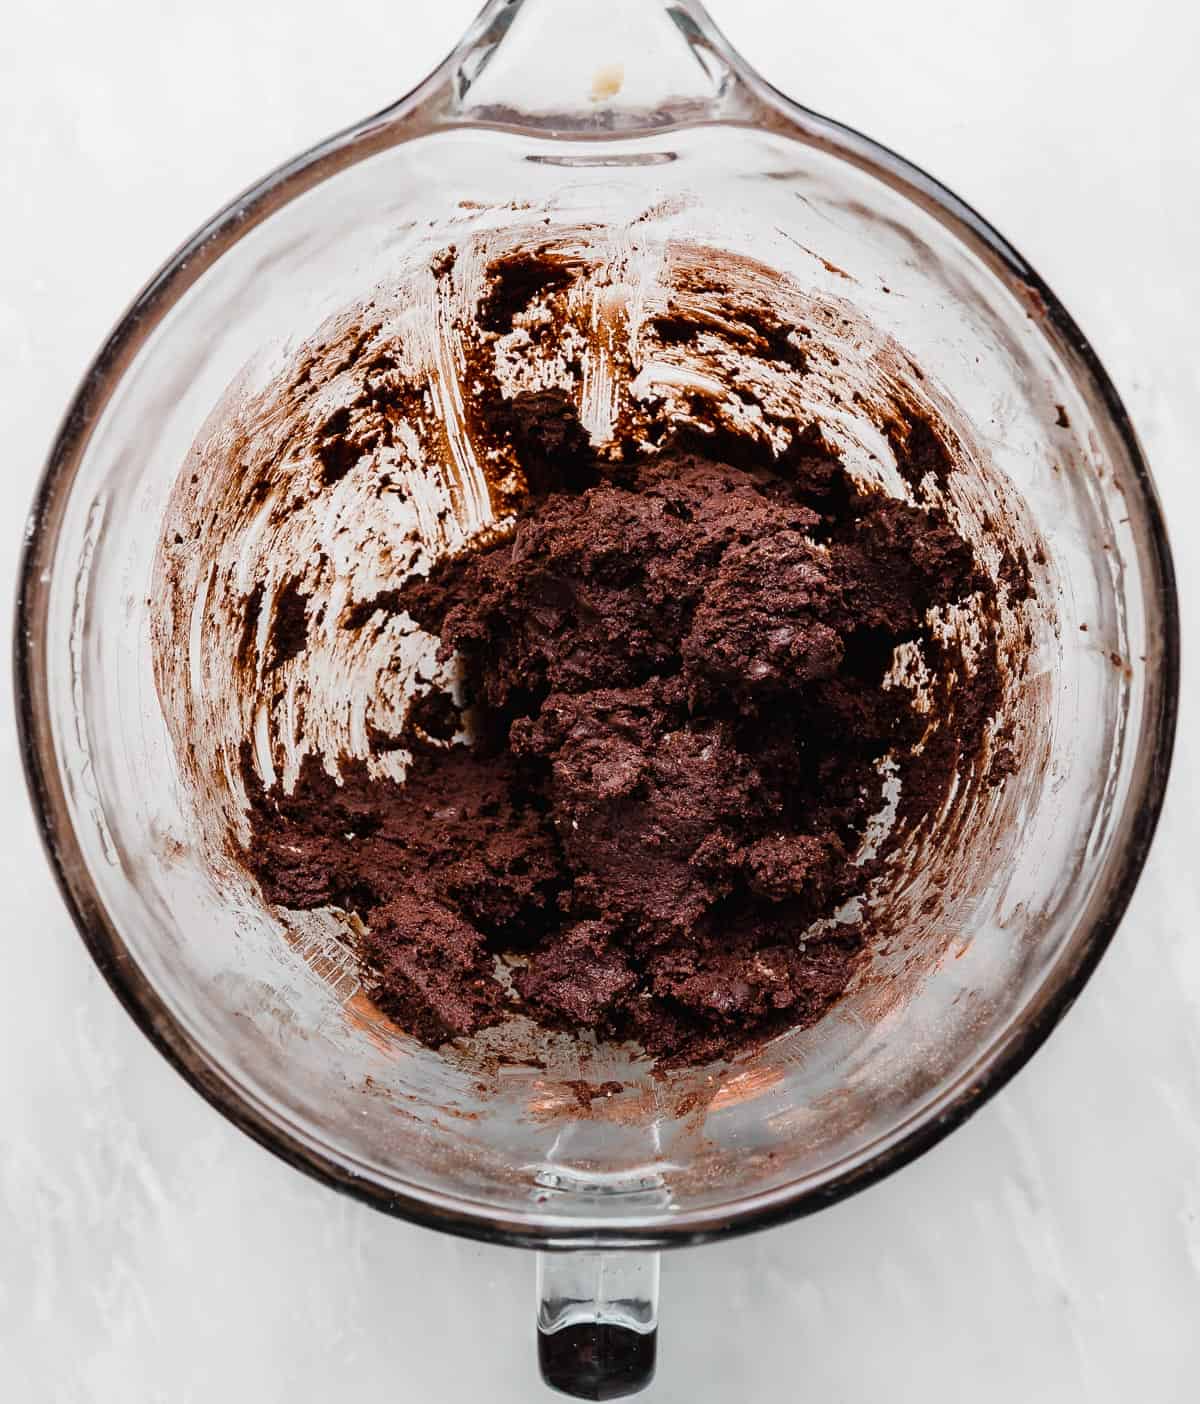 Chocolate peppermint cookie dough batter in a glass bowl on a white background.